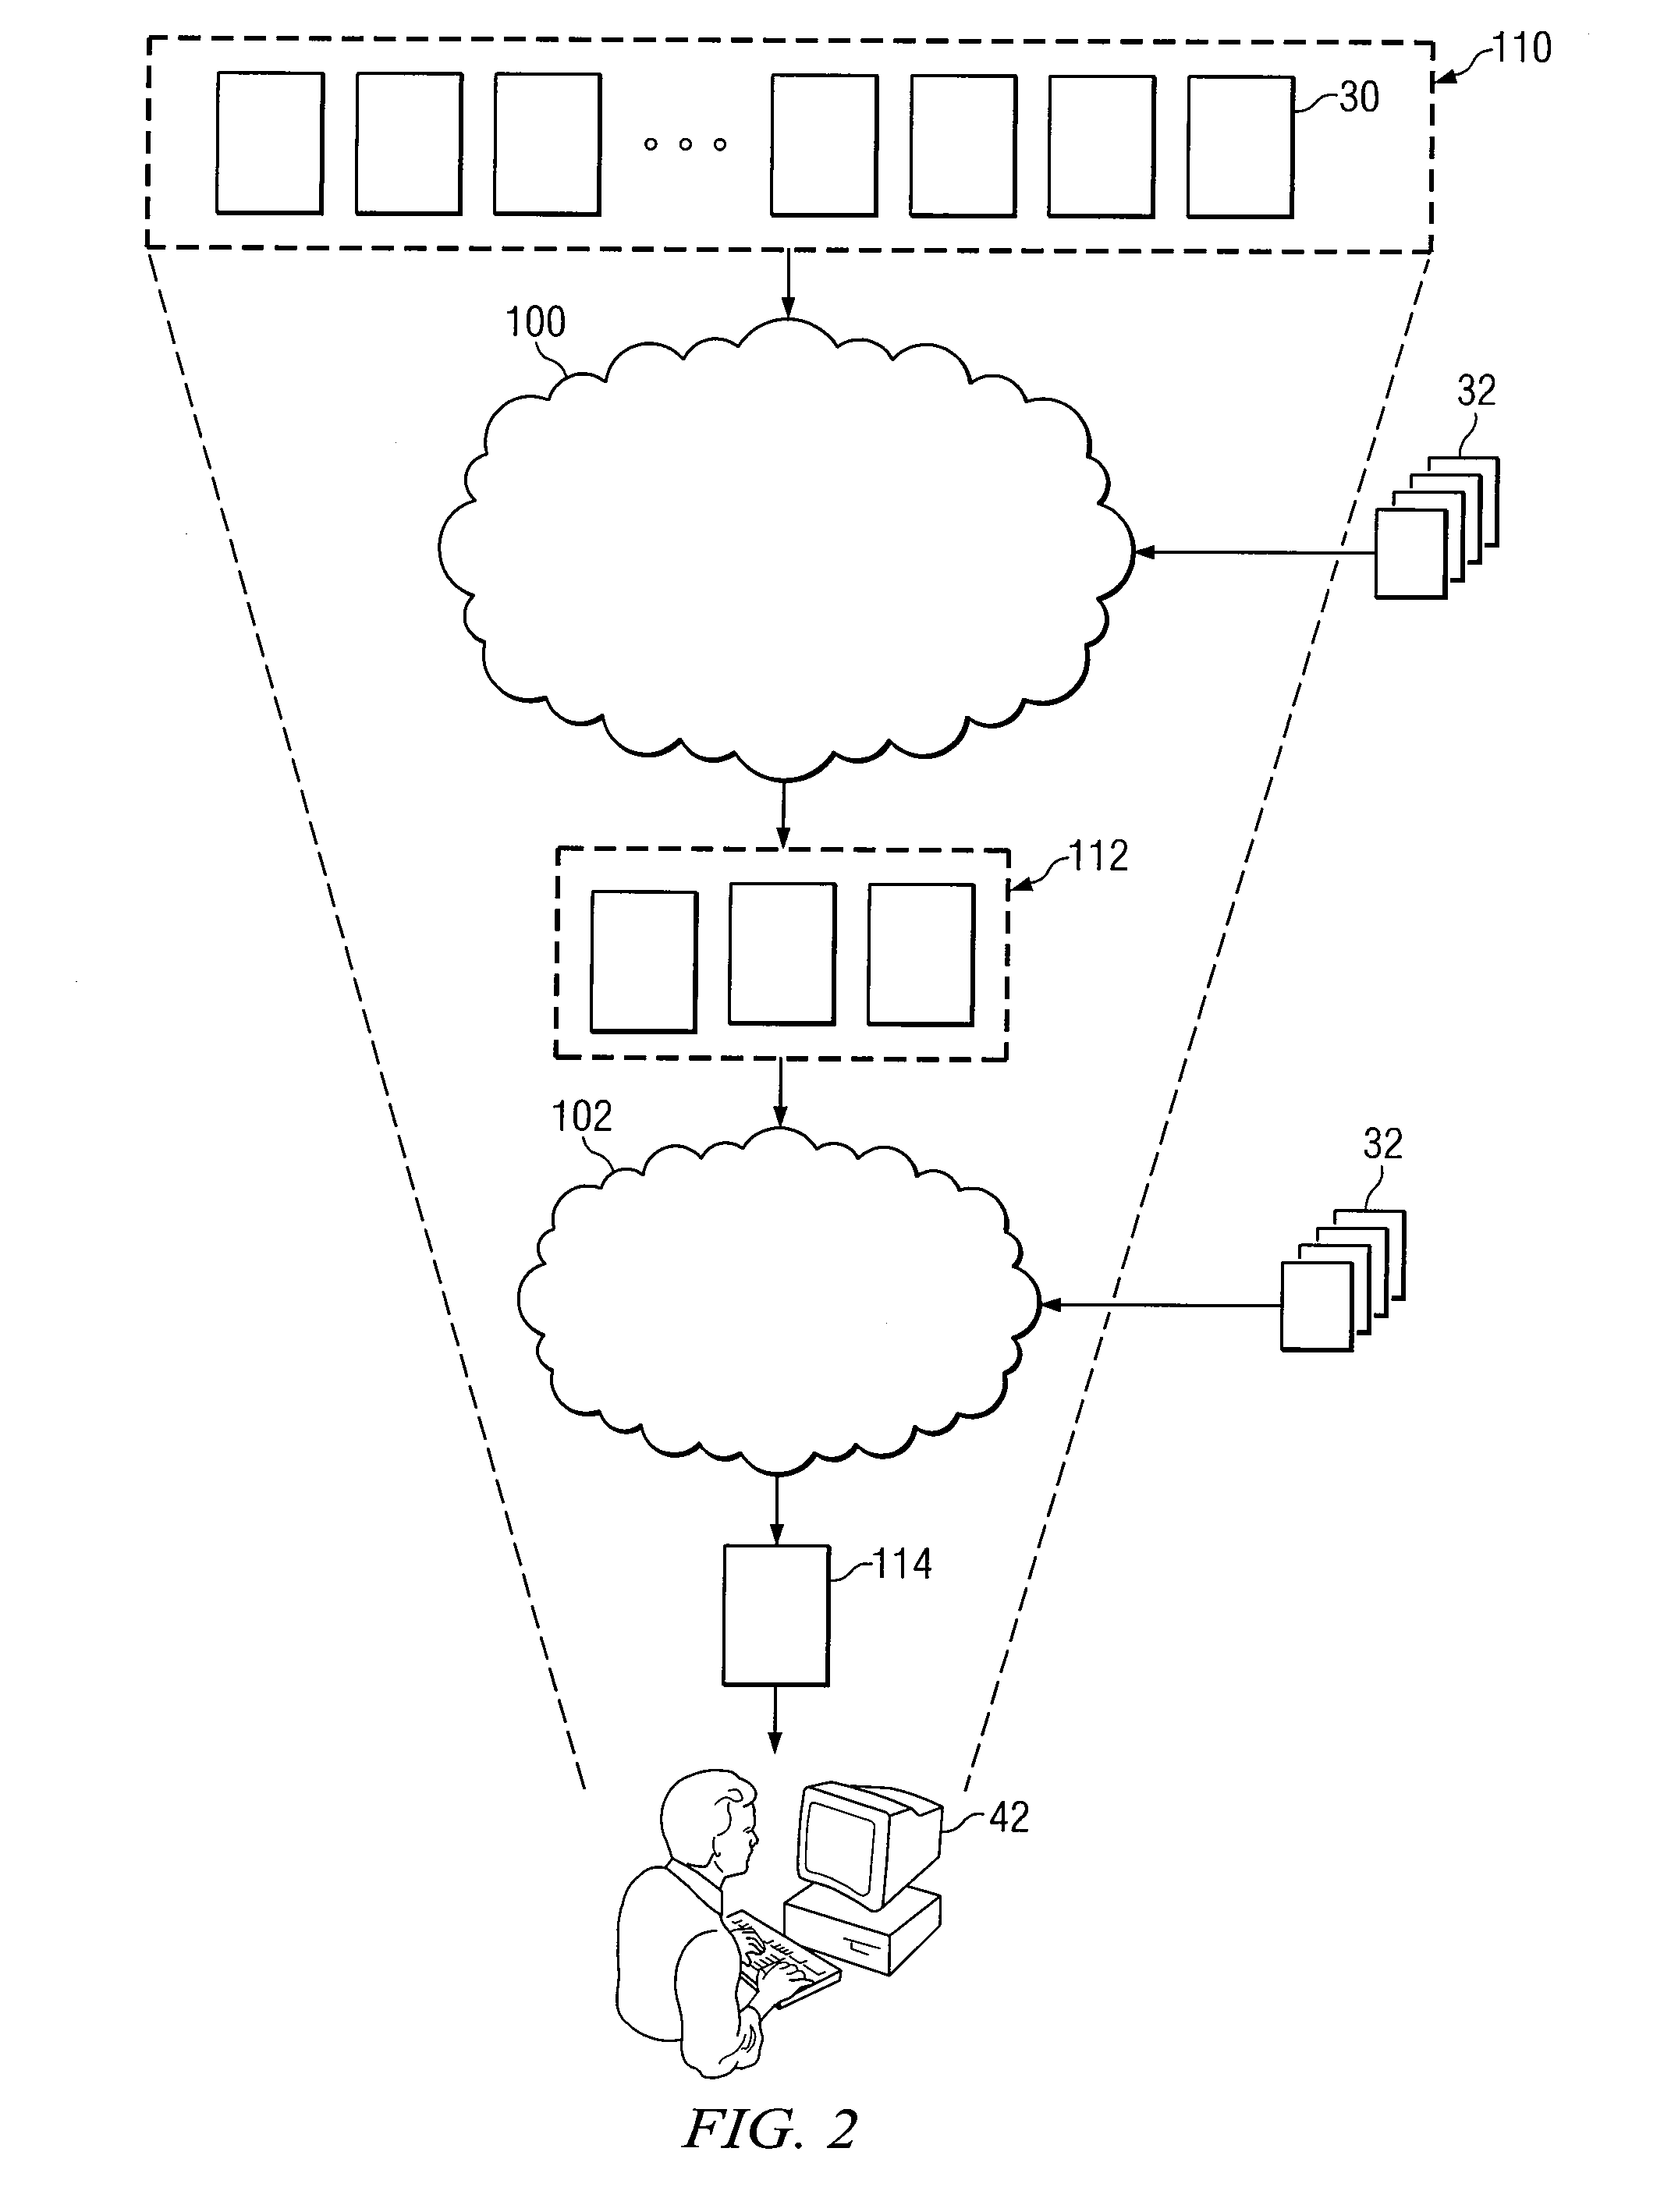 System and Method for Identifying Content